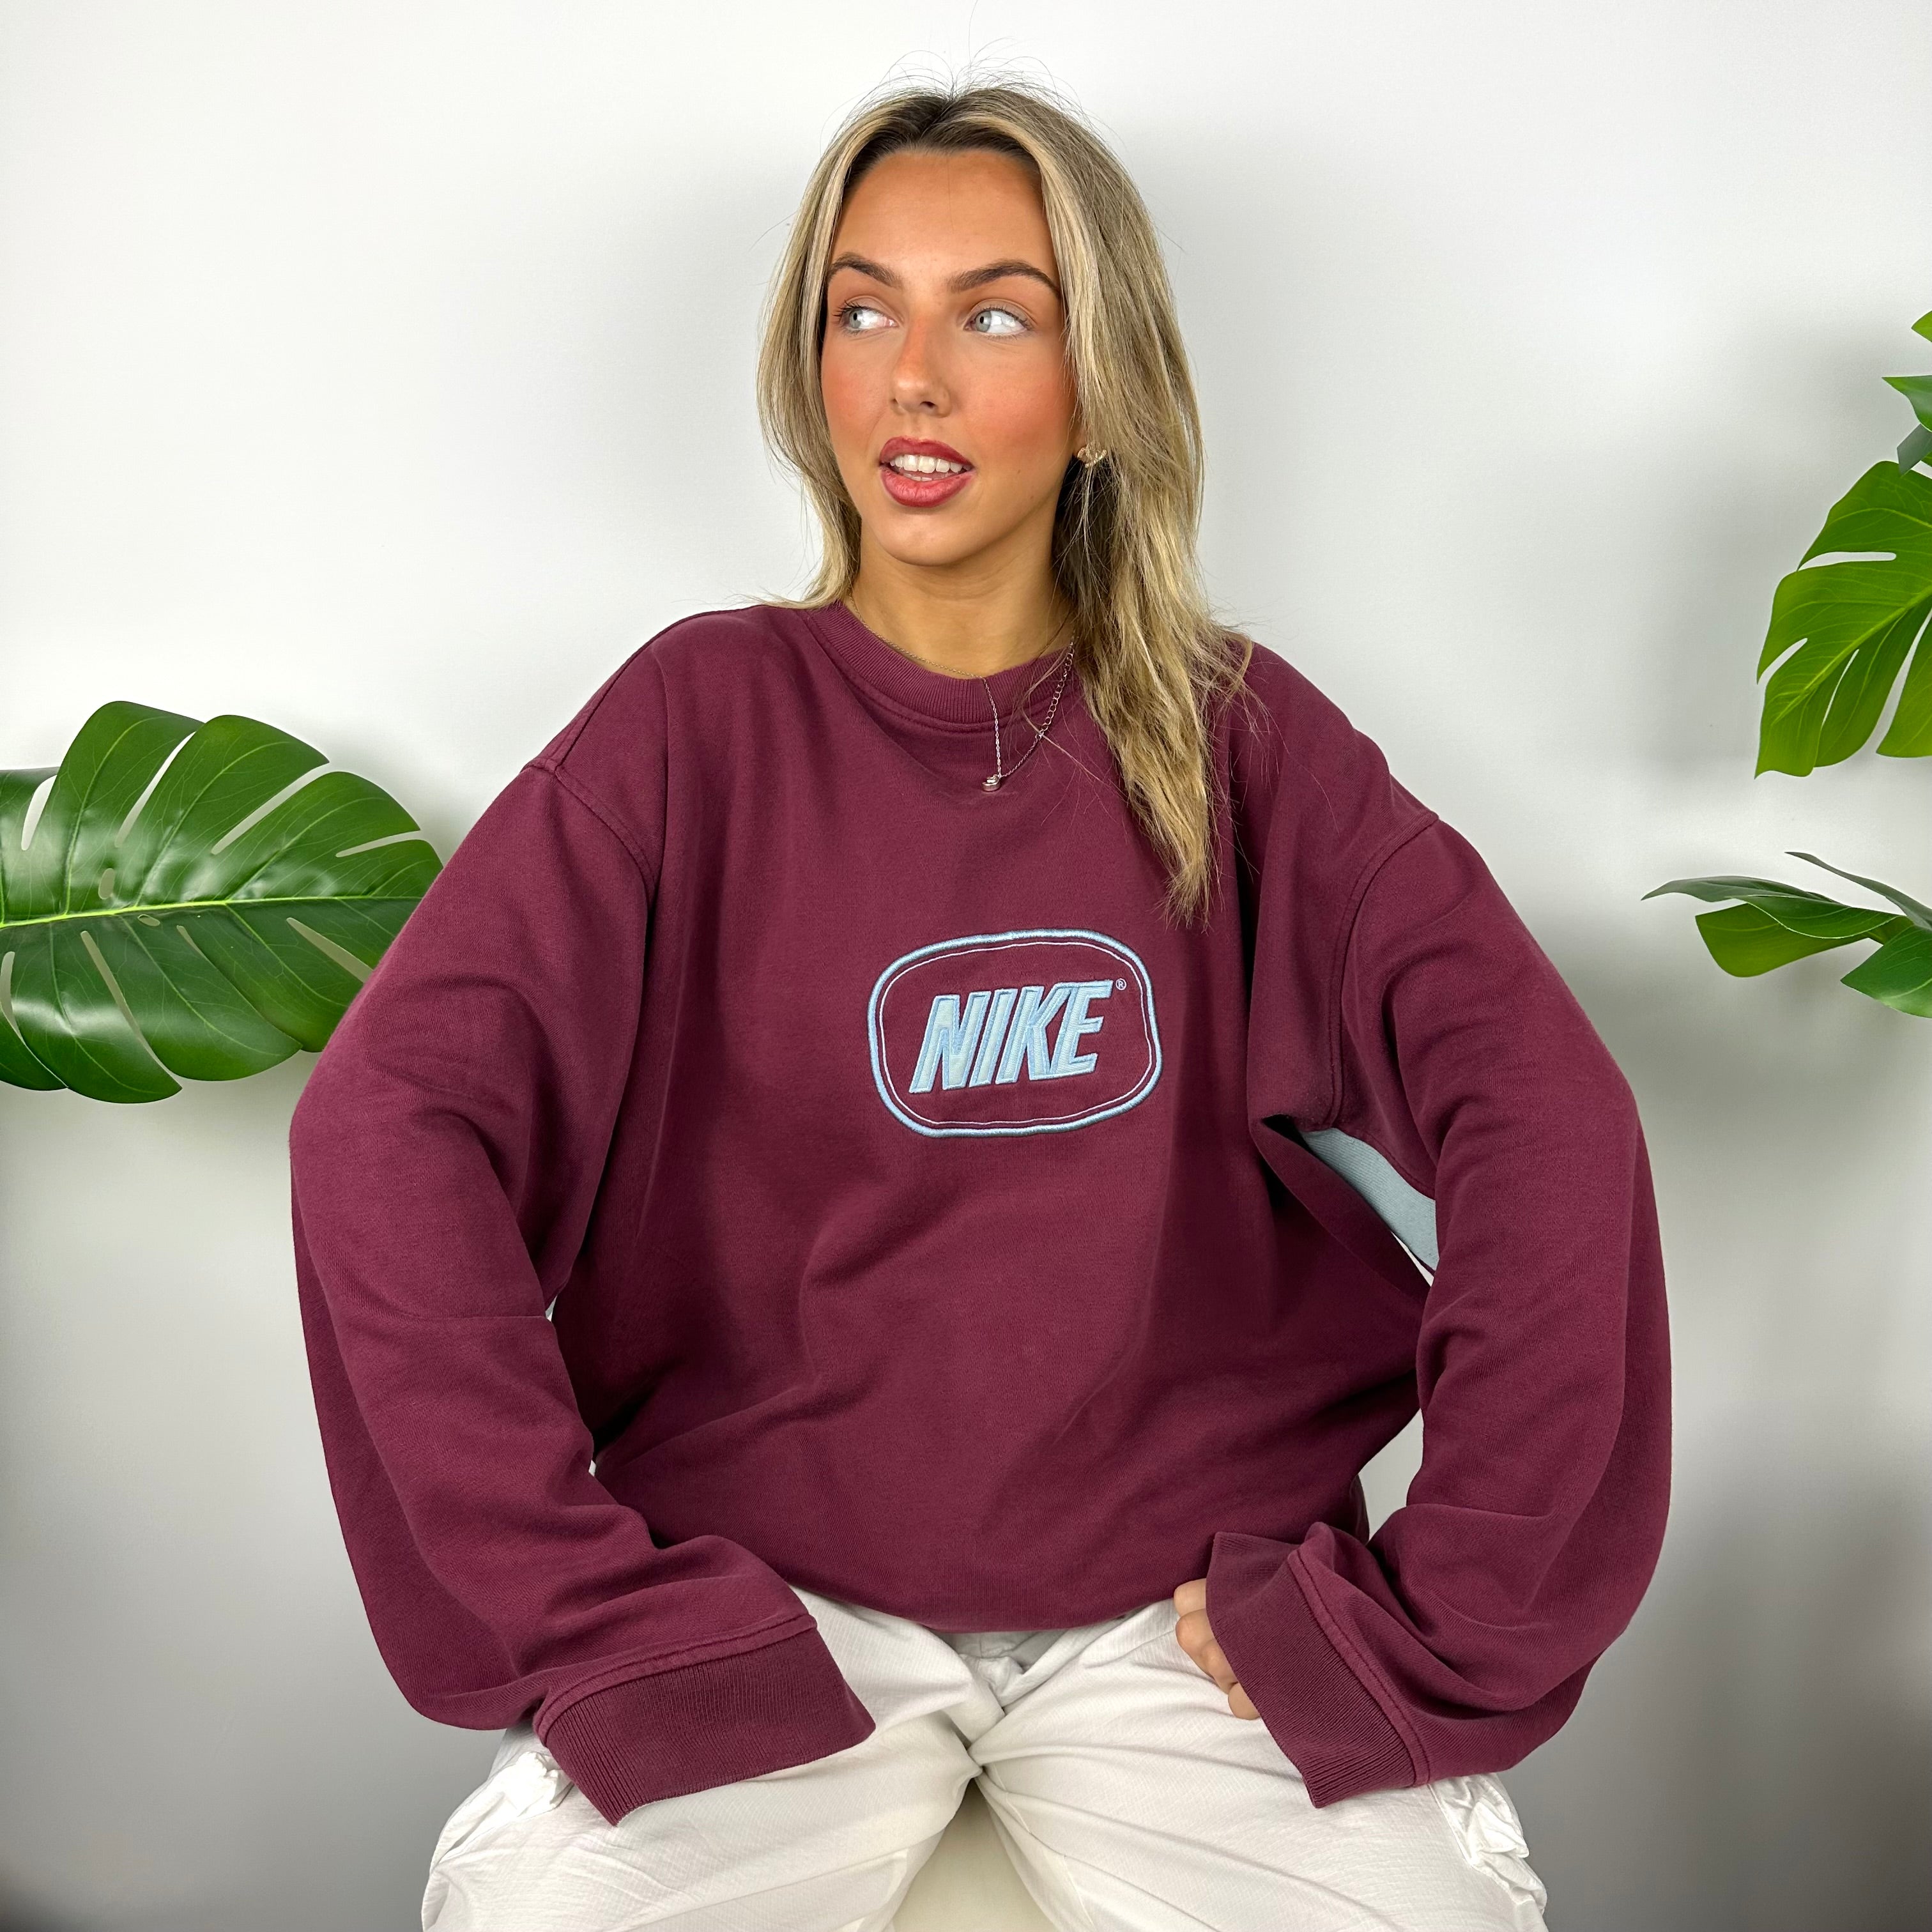 Nike Maroon Embroidered Spell Out Sweatshirt (XXL)